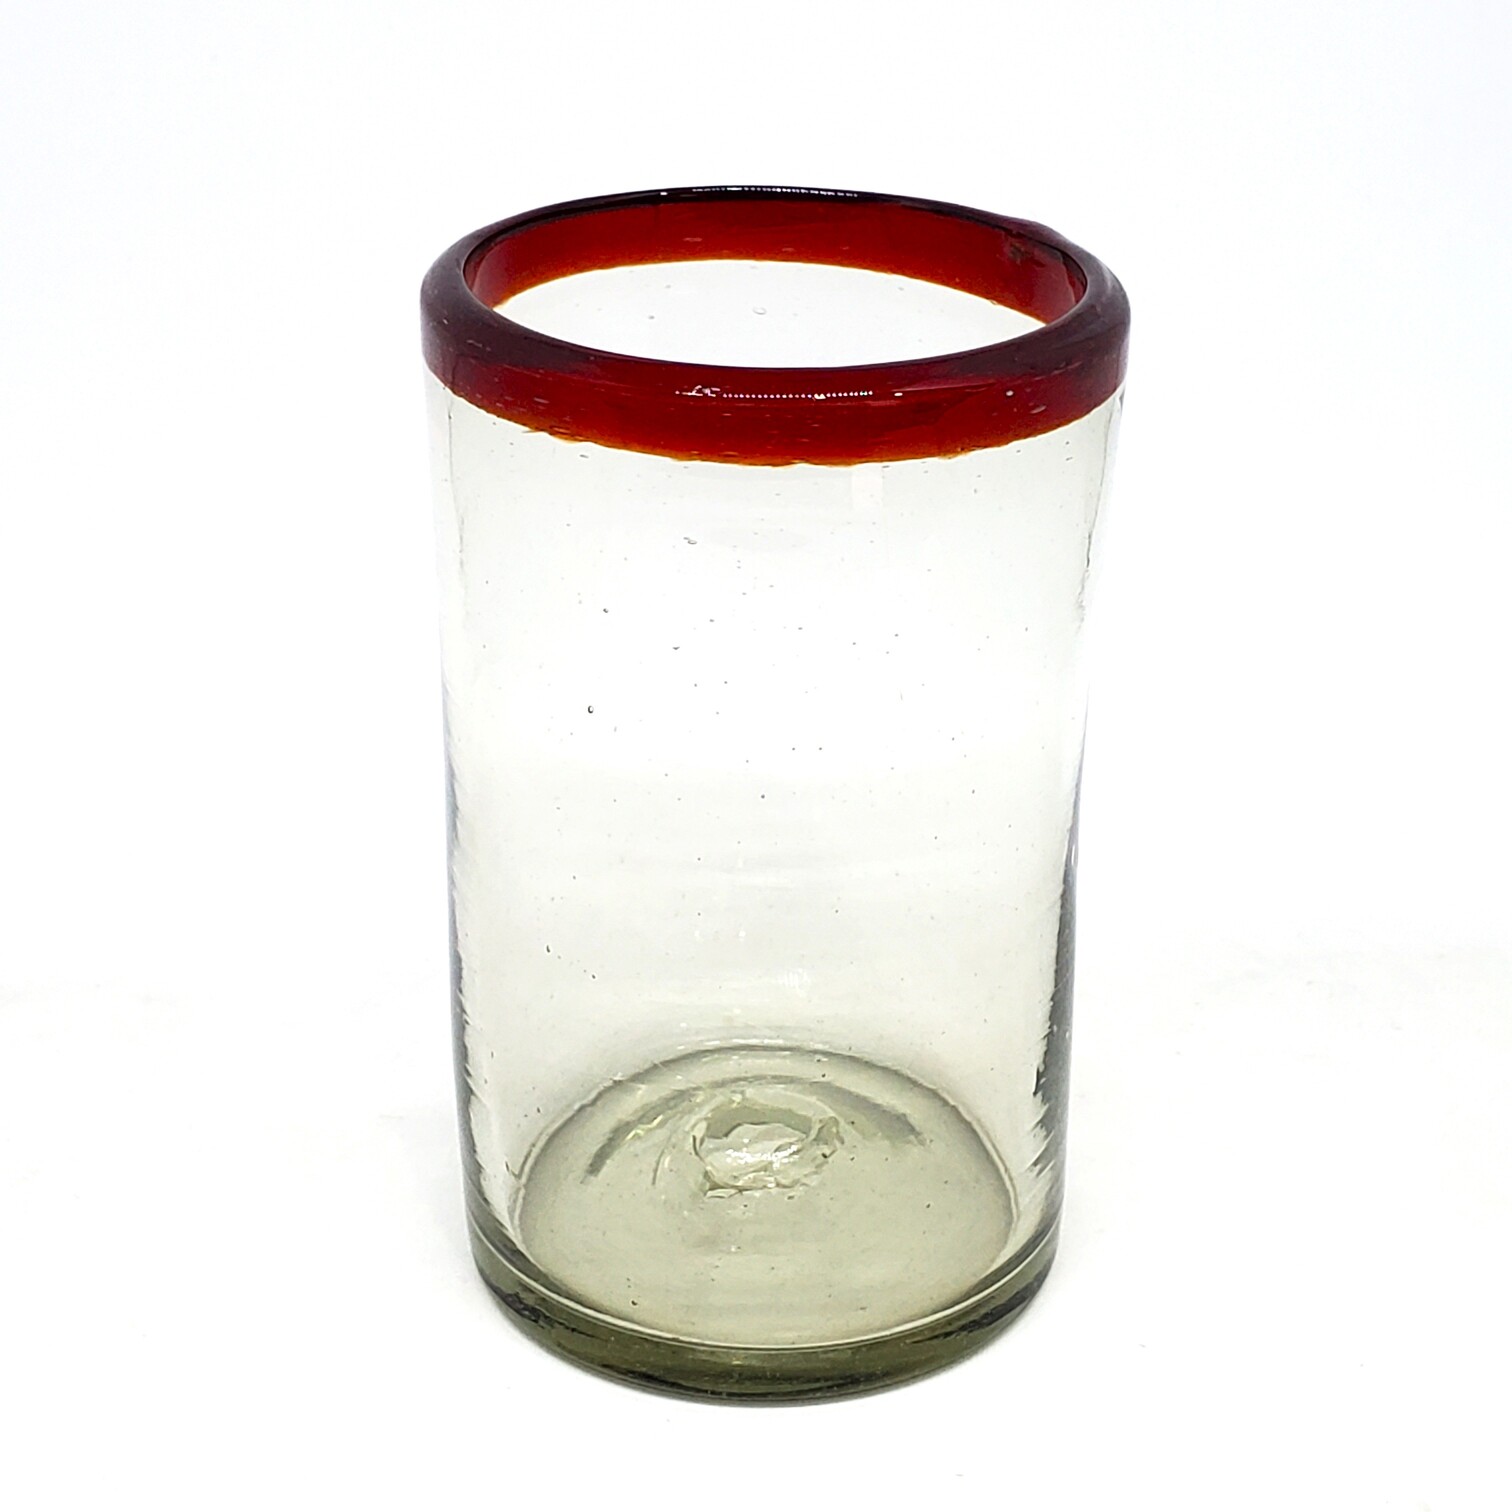 Sale Items / Ruby Red Rim 14 oz Drinking Glasses (set of 6) / These handcrafted glasses deliver a classic touch to your favorite drink.